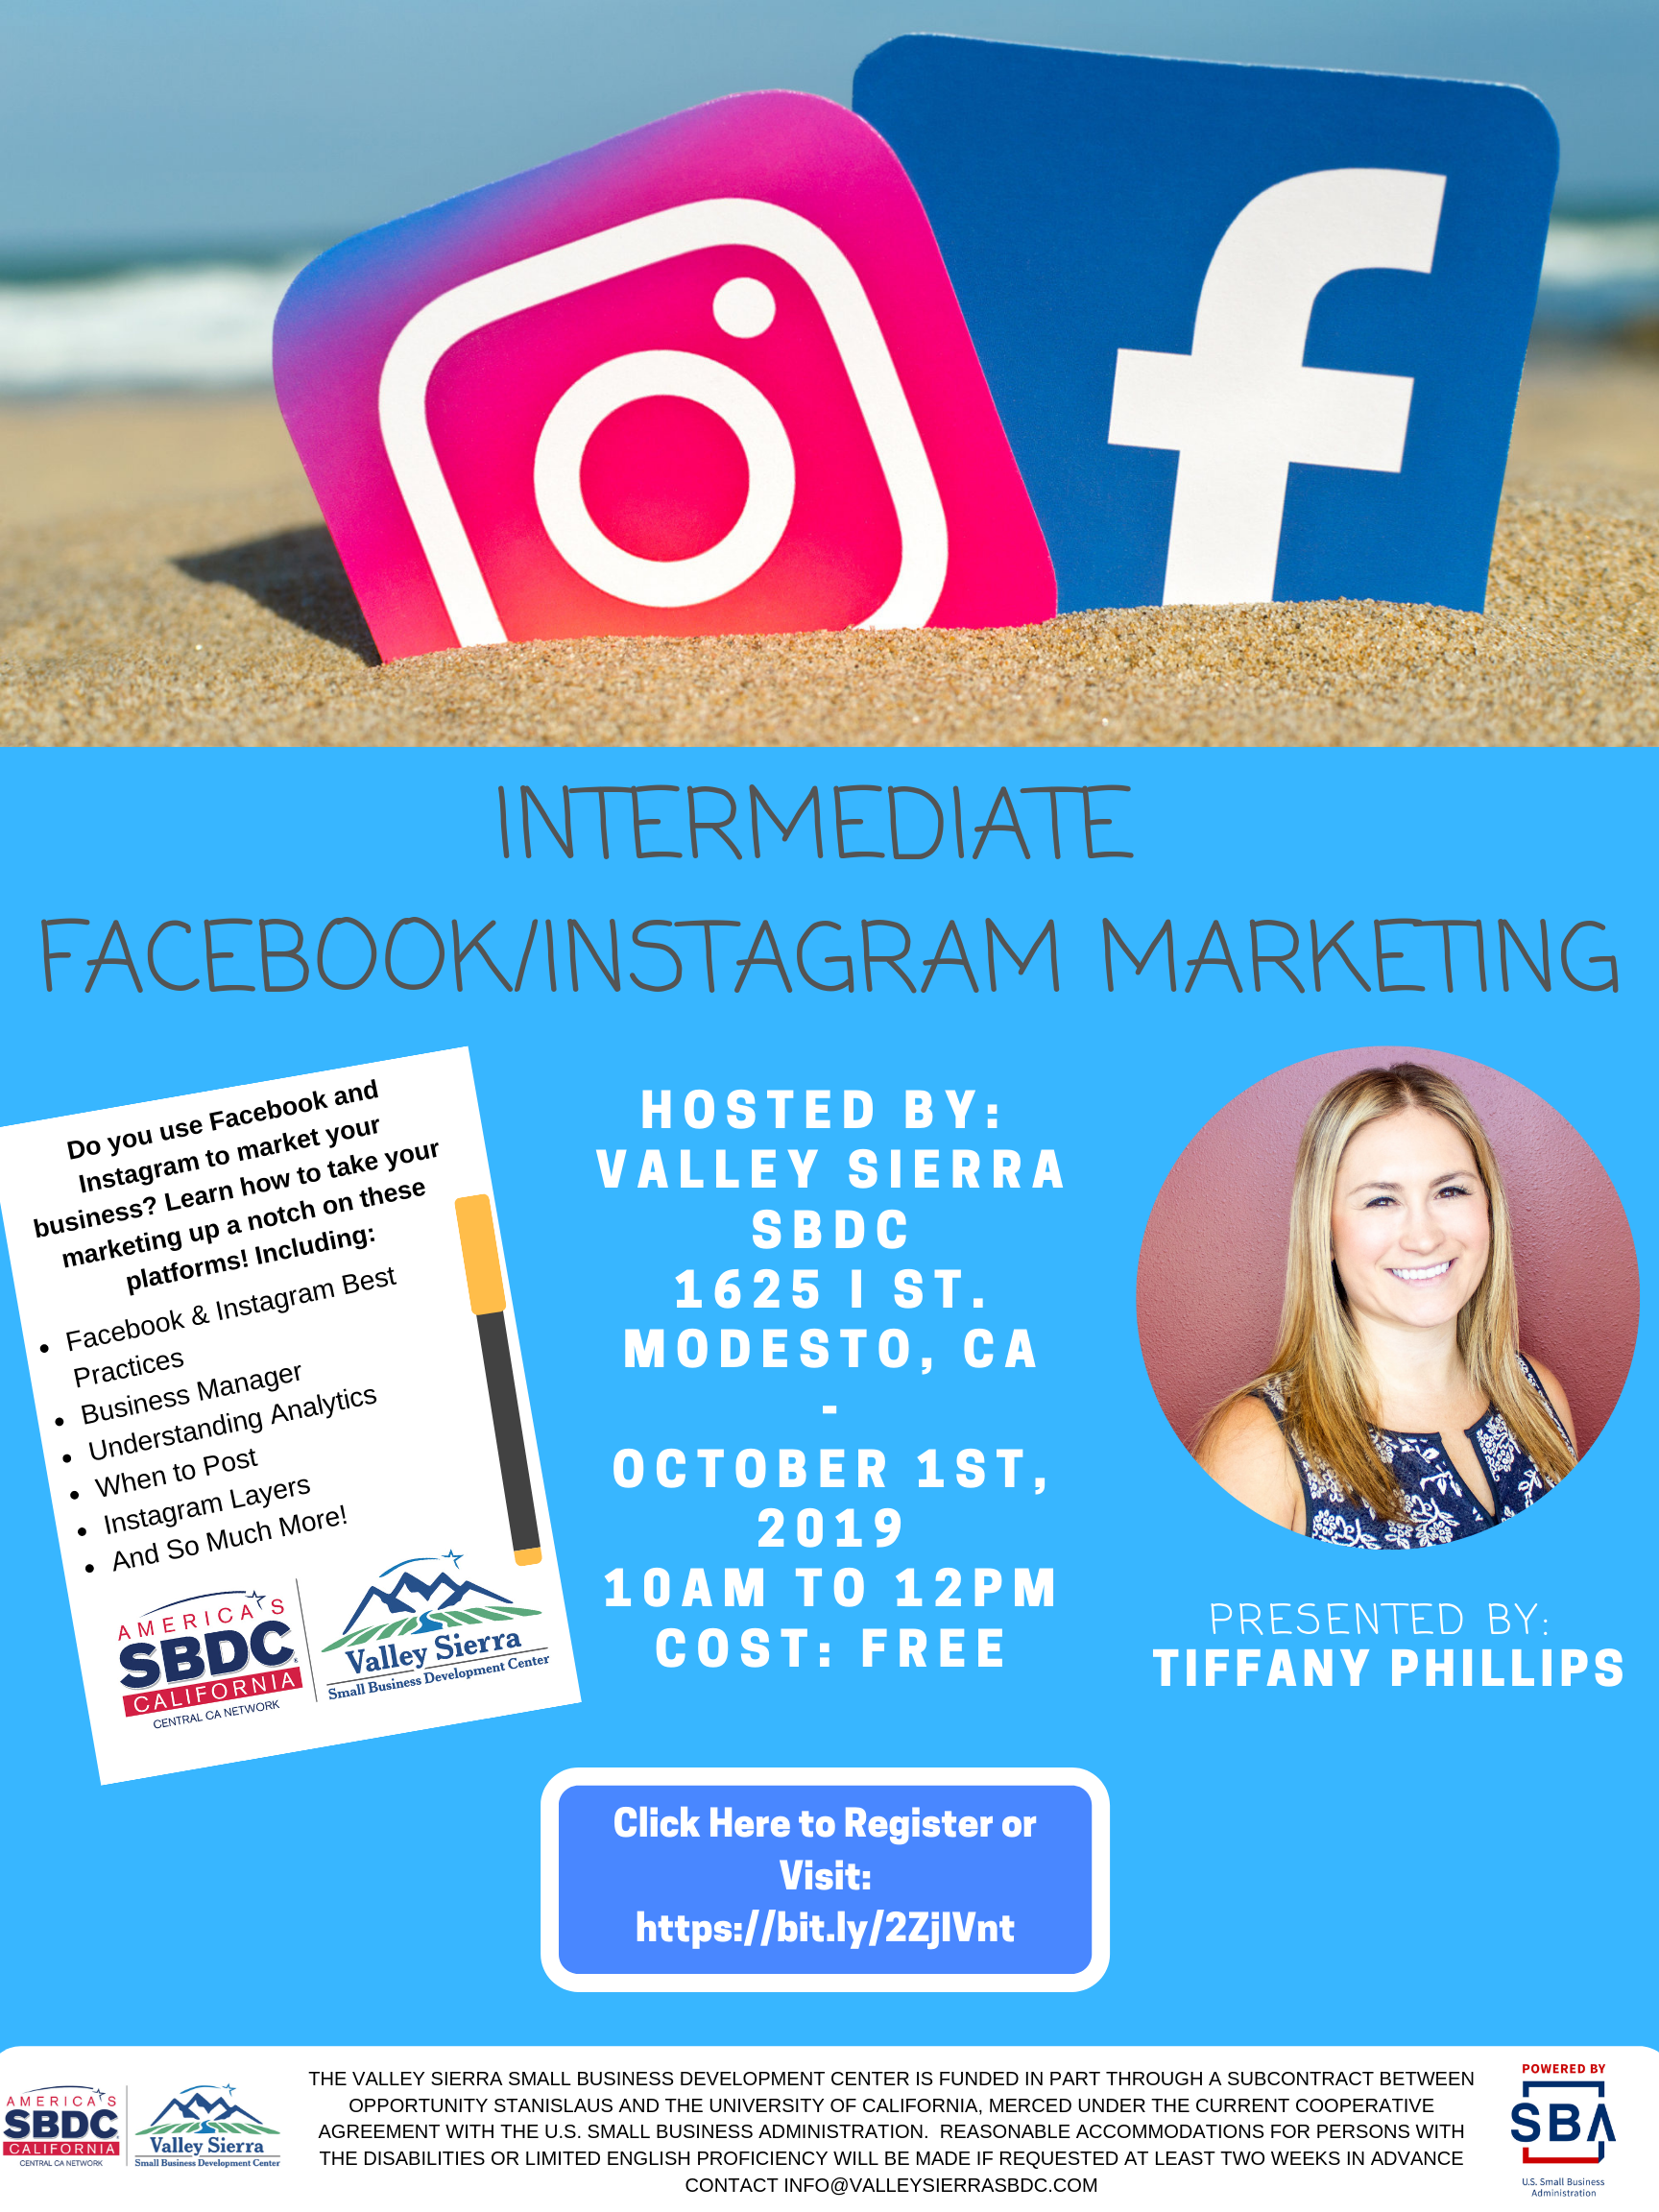 Event Flyer, Hosted by Valley Sierra SBDC, 1625 I St. Modesto, CA, October 1st, 2019, 10am to 12pm, Cost is Free.  Learn how to take your marketing up a notch on these platforms! Including: Facebook & Instagram Best Practices, Business Manager, Understanding Analytics, When to Post, Instagram Layers And So Much More!